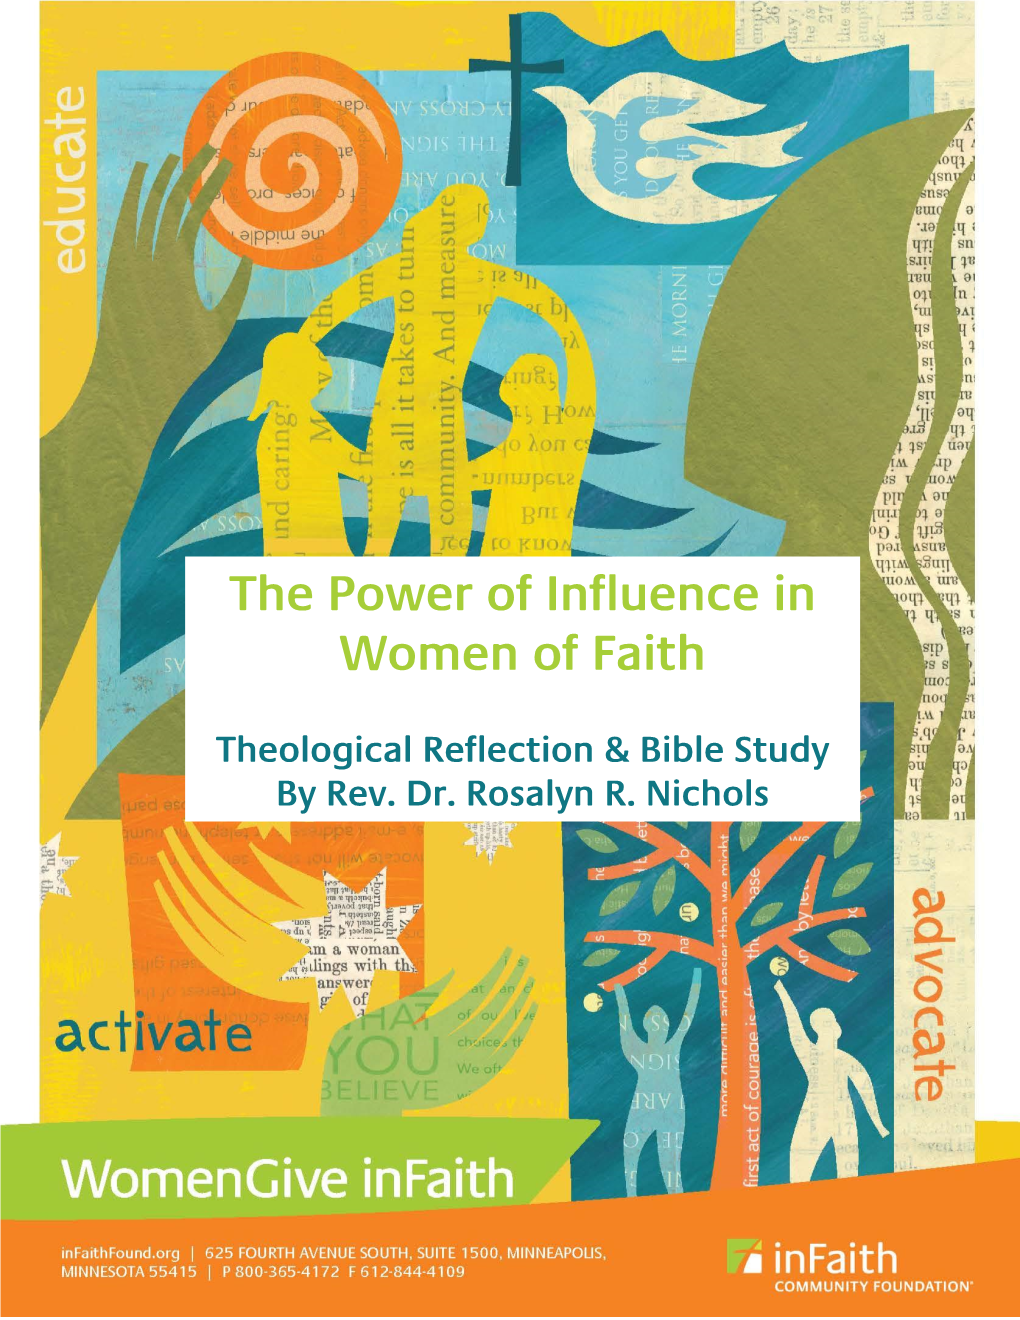 The Power of Influence in Women of Faith